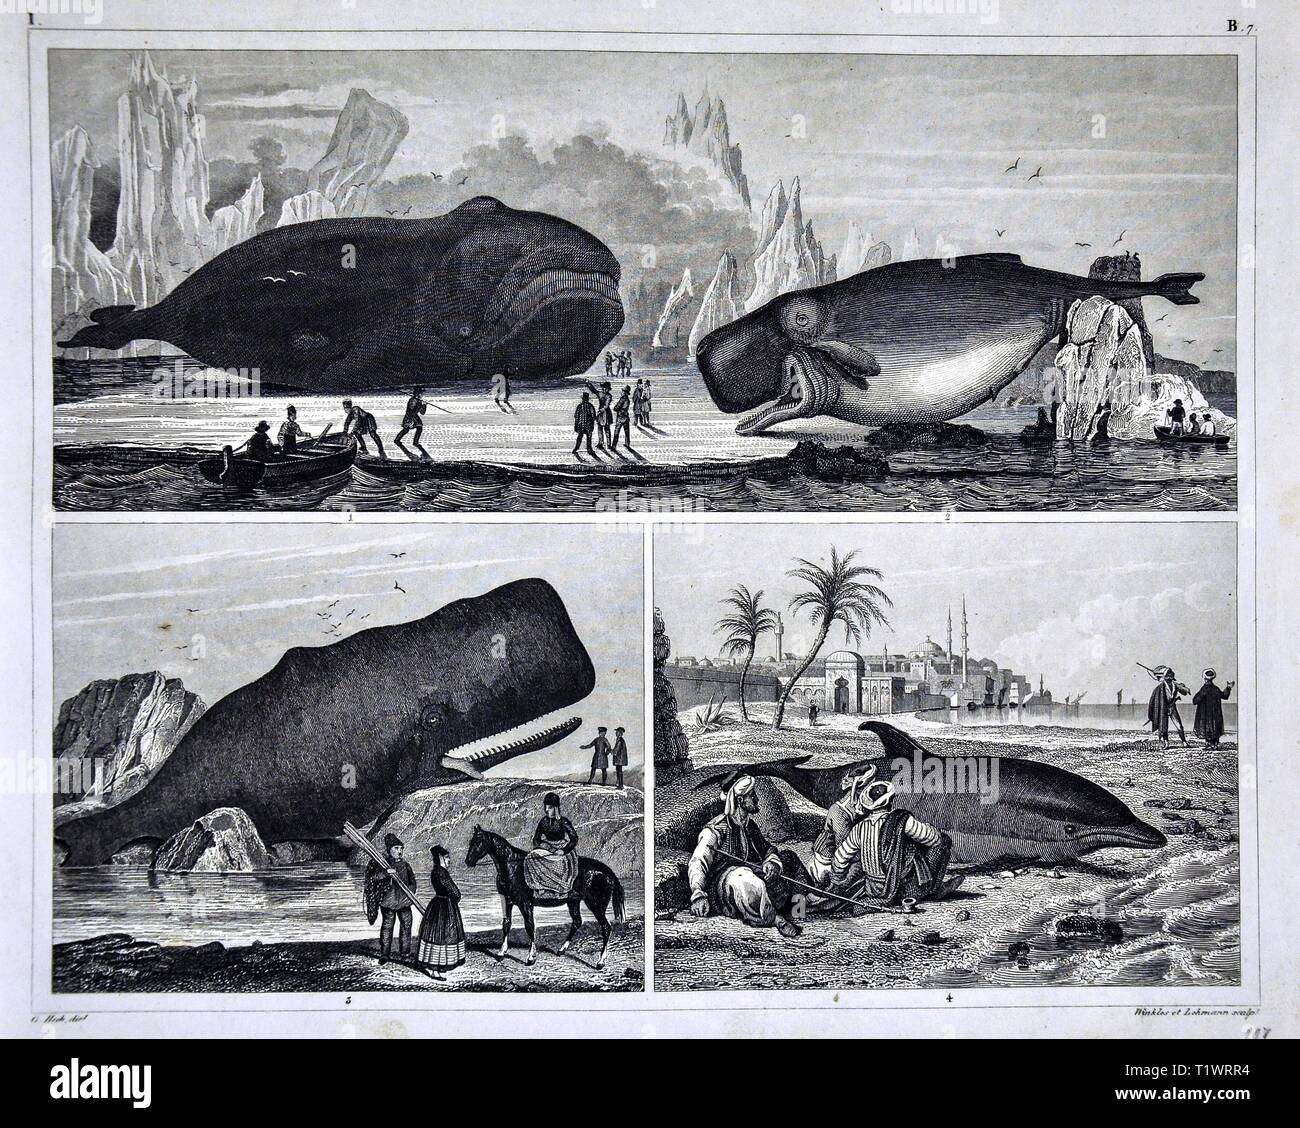 1849 Zoological Print - Wildlife Animals - Aquatic Mammals including Whales and Porpoise Stock Photo